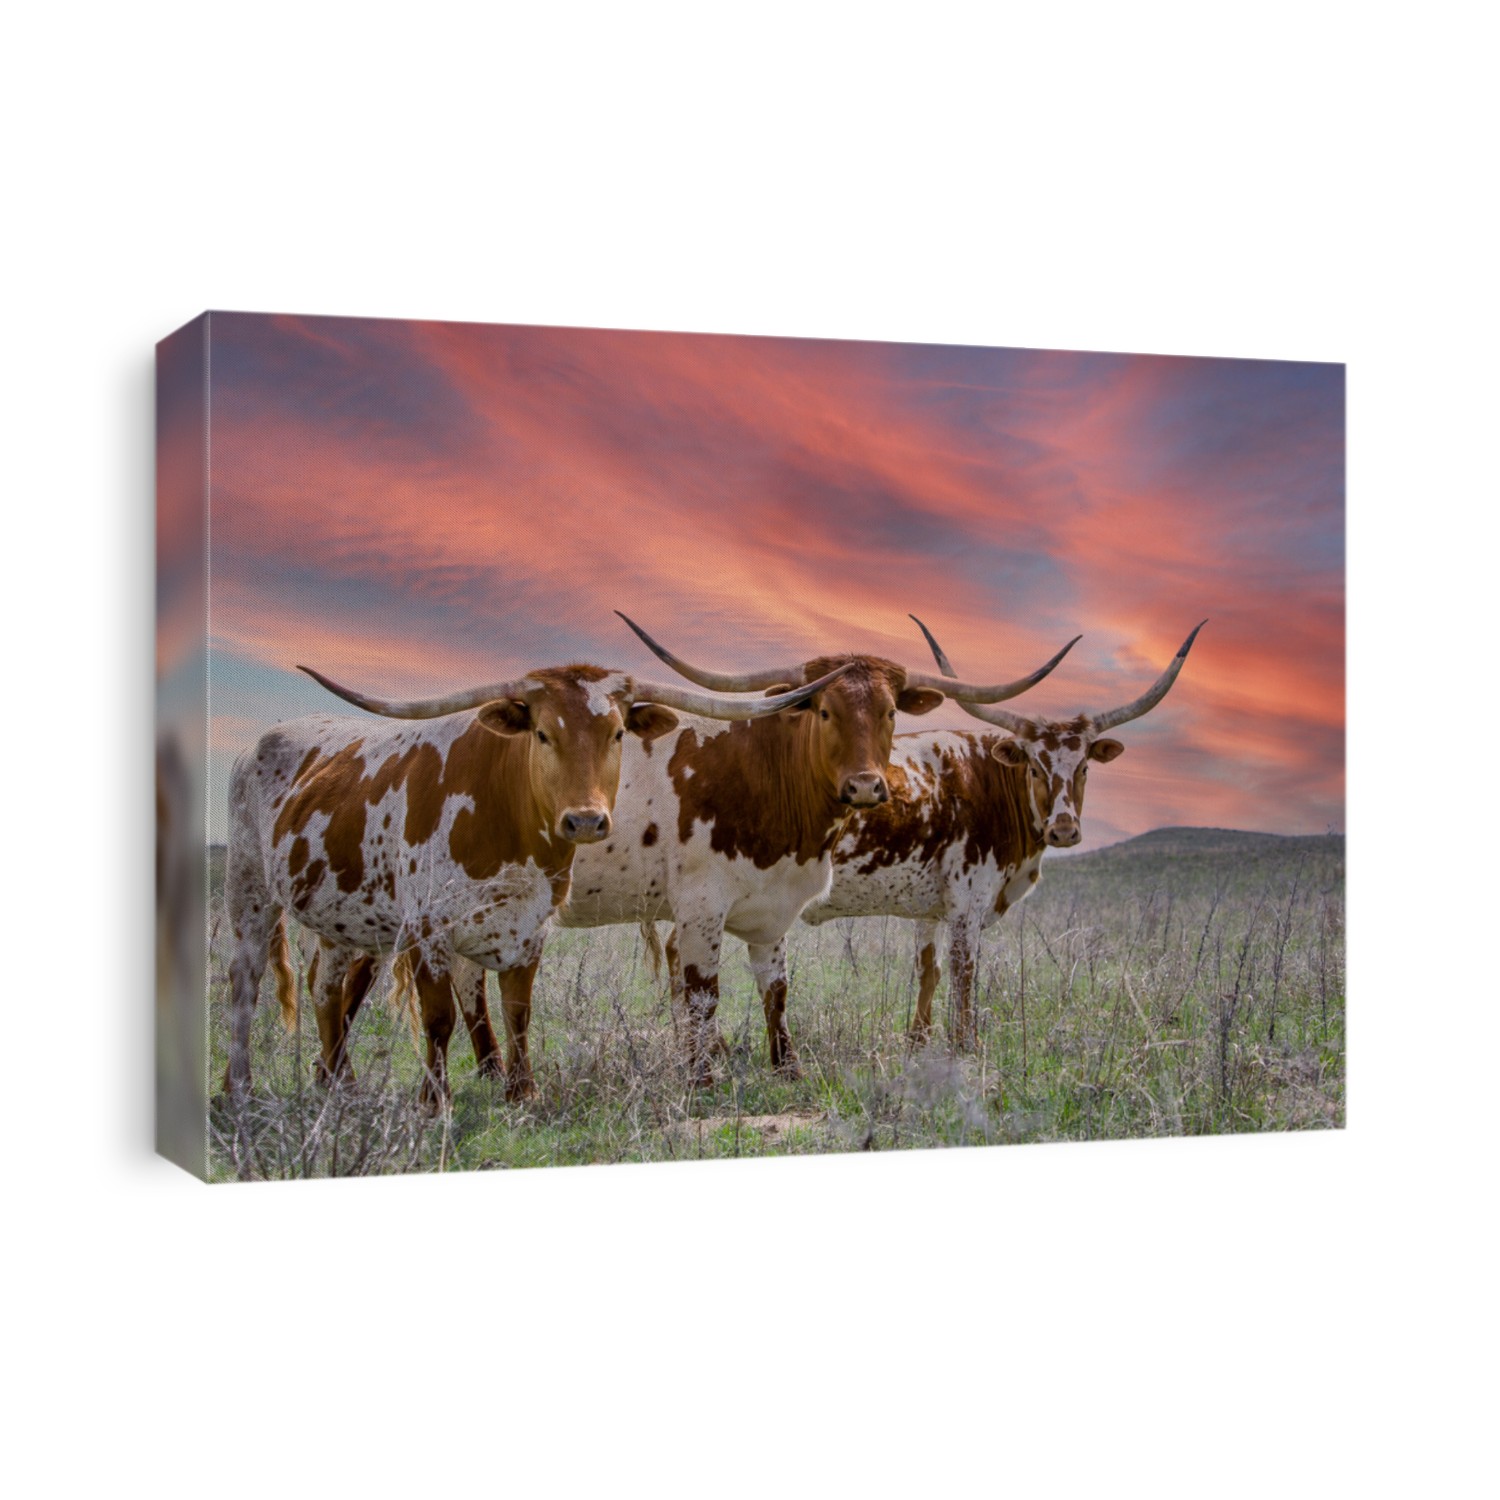 Texas longhorn cattle at sunset in a pasture in the Oklahoma panhandle.